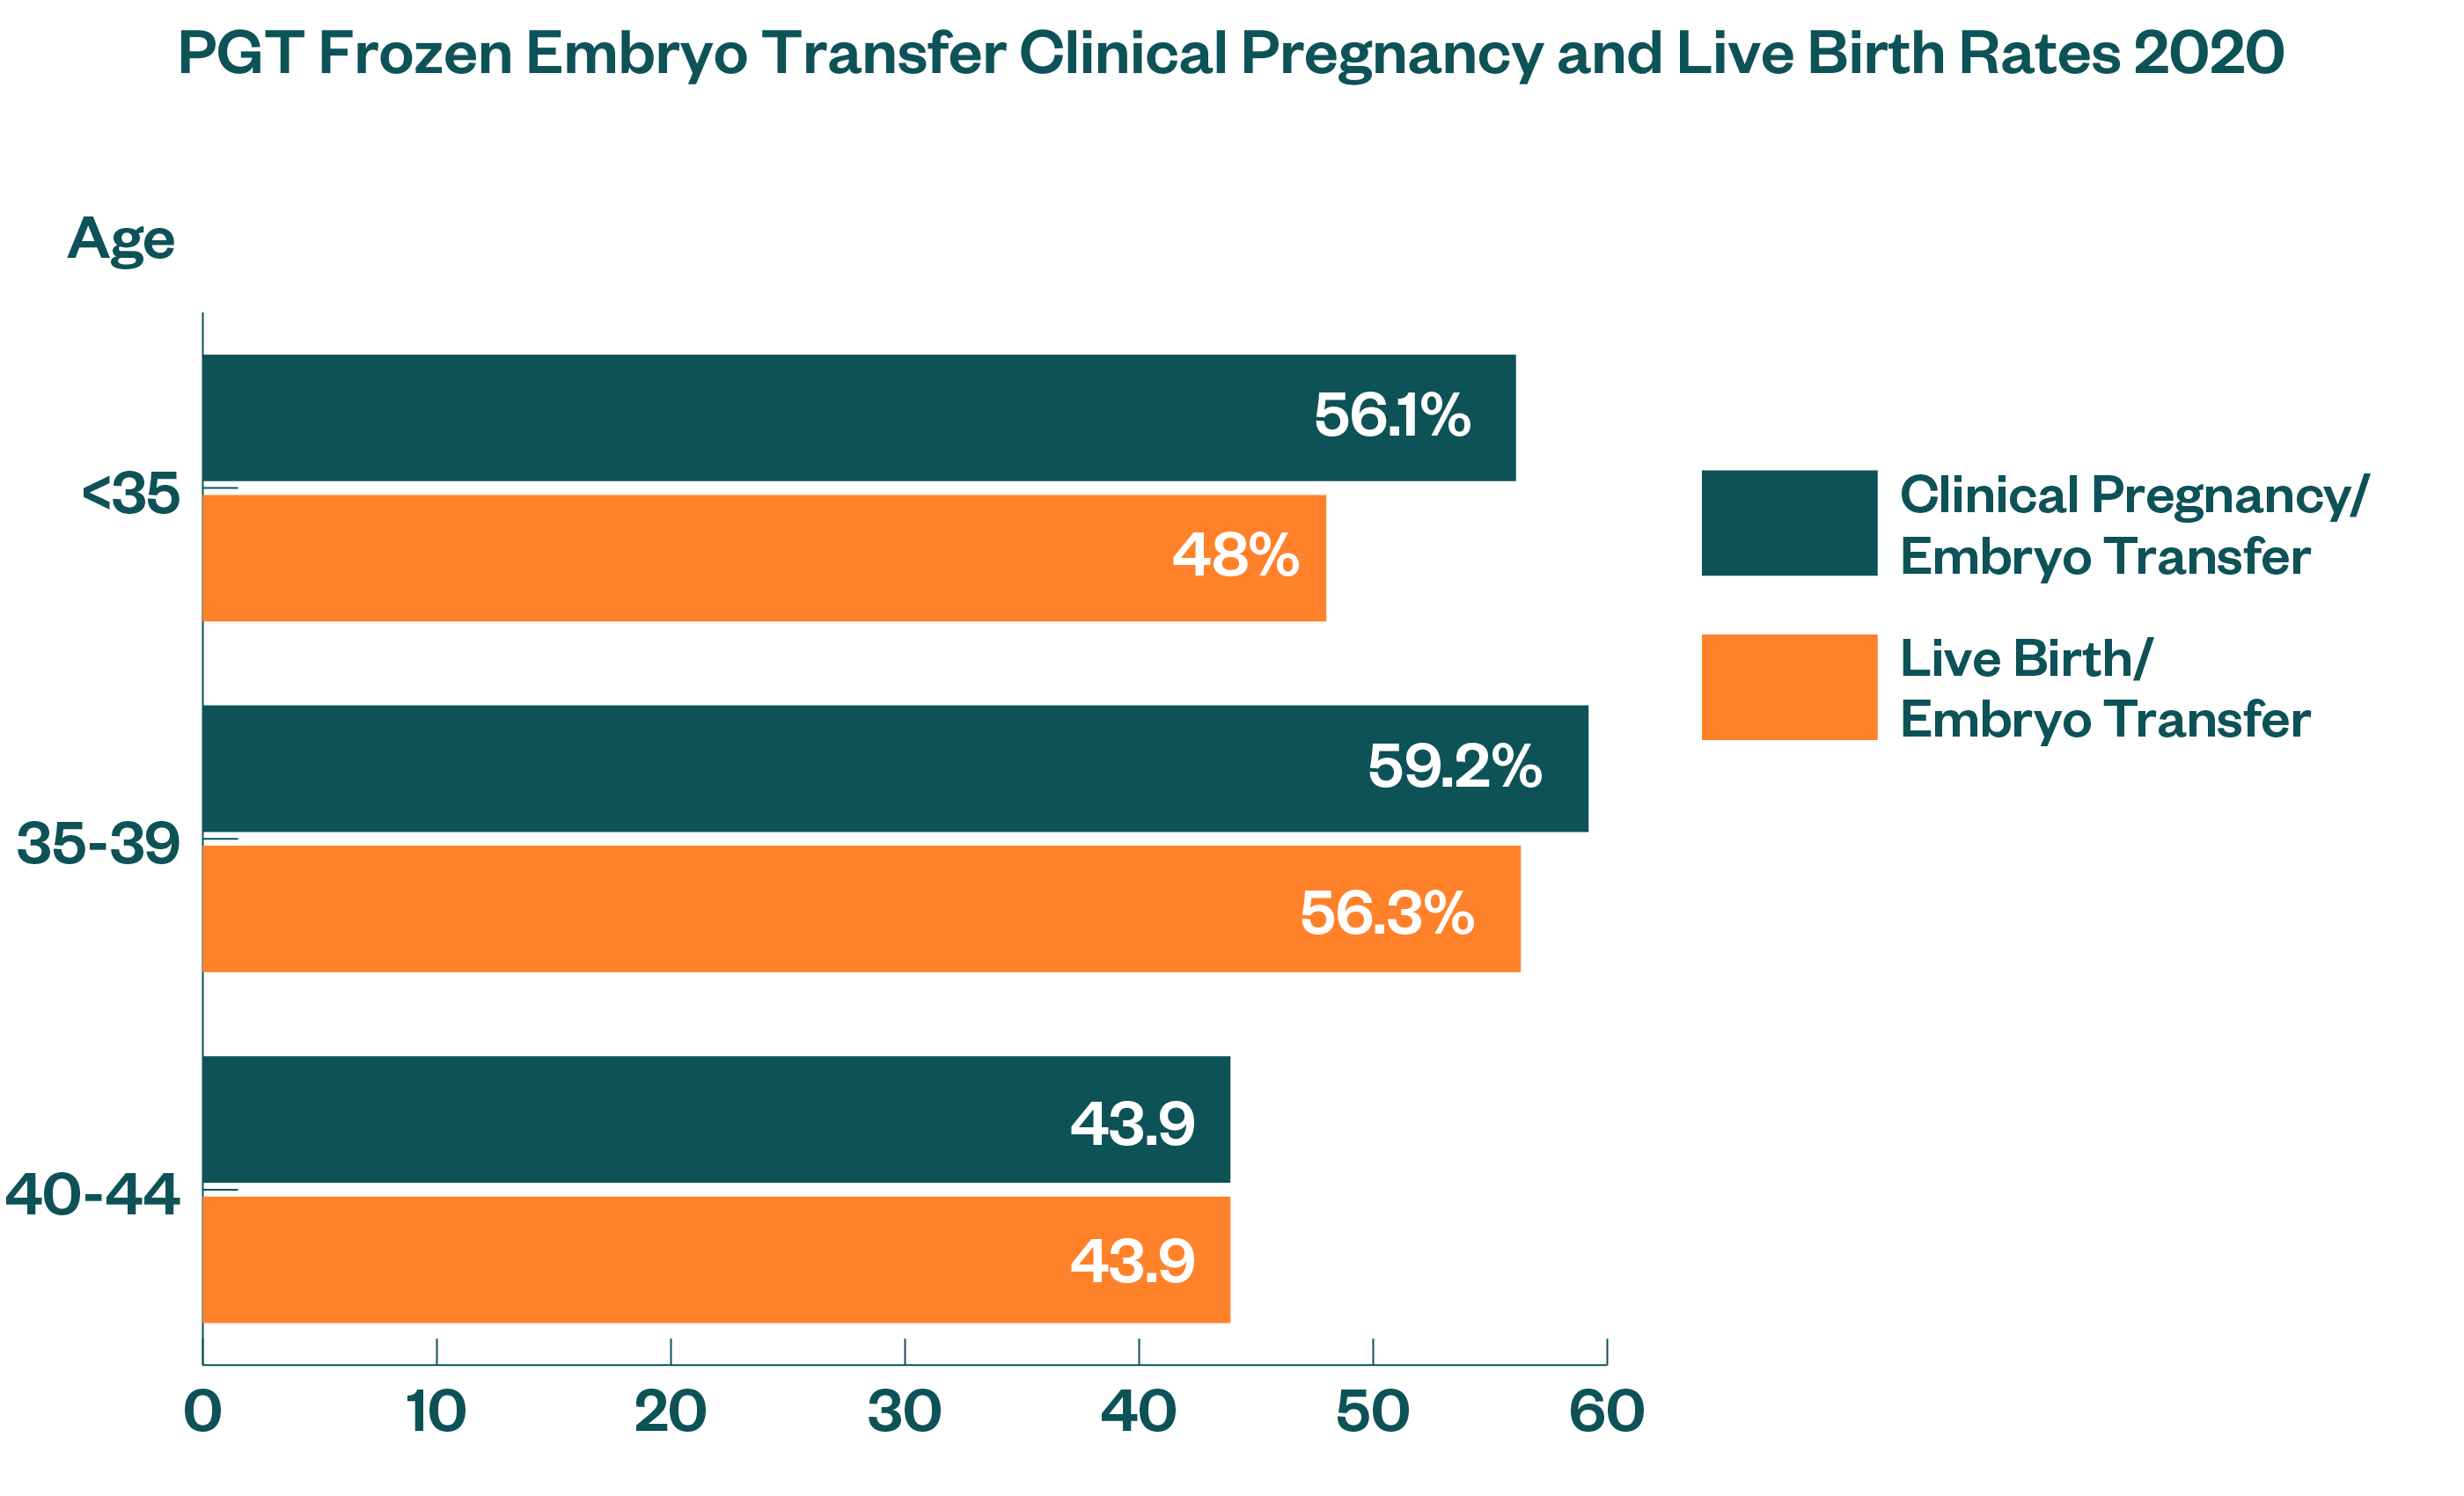 PGT Frozen Embryo Transfer Clinical Pregnancy and Live Birth Rates 2020